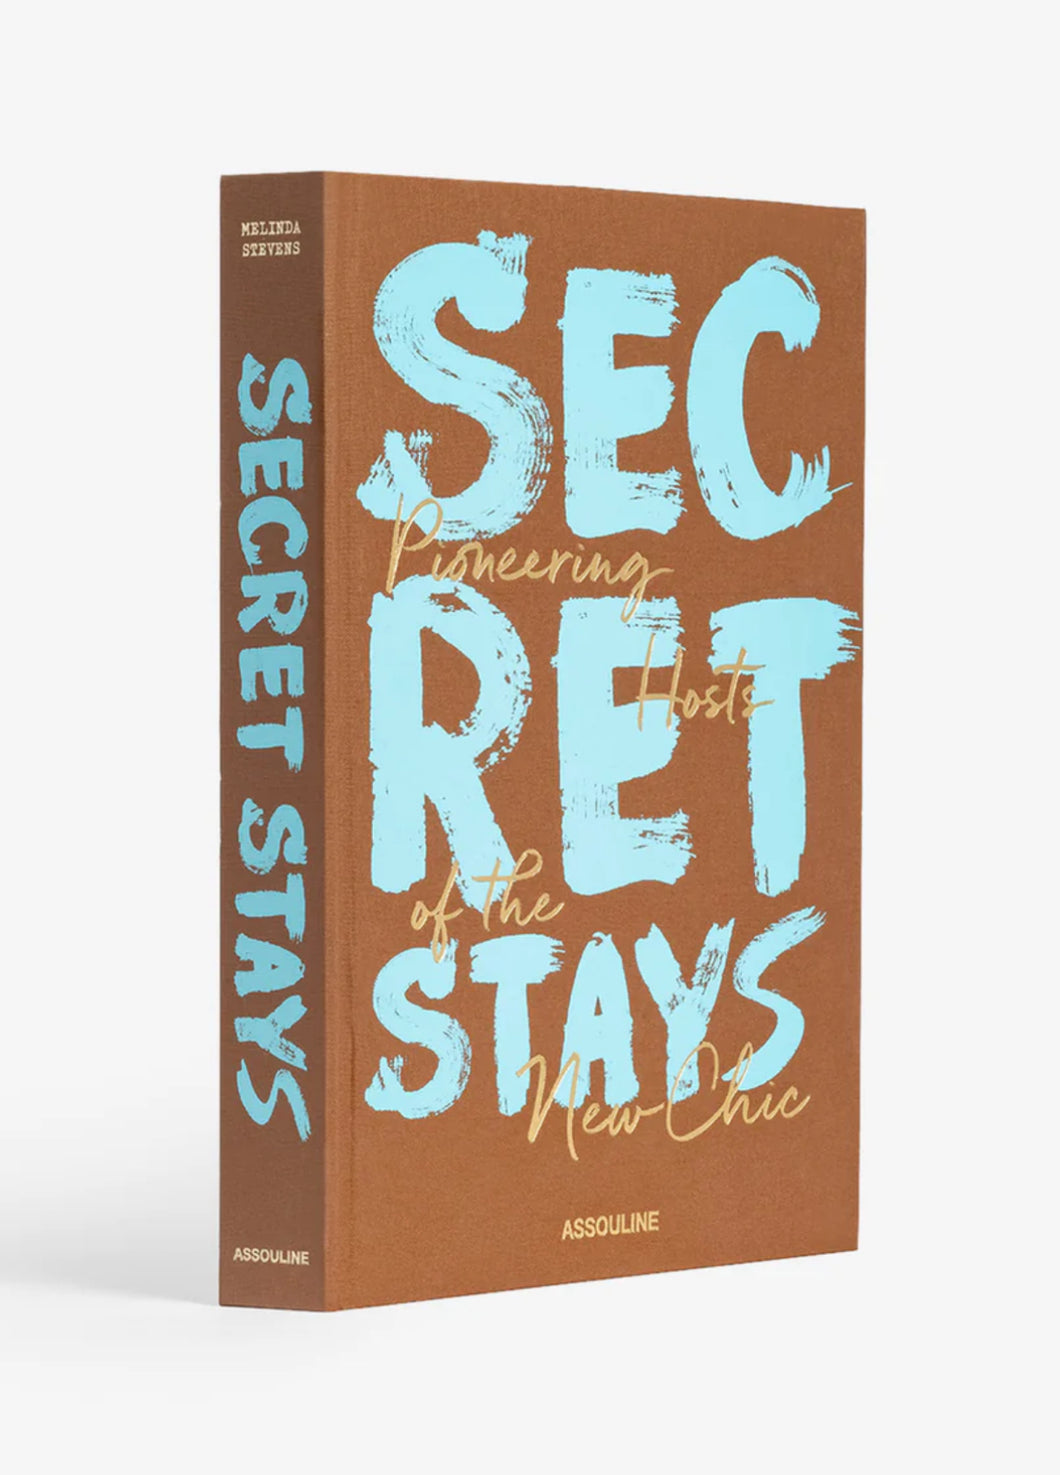 Secret Stays, Pioneering host of the New Chic